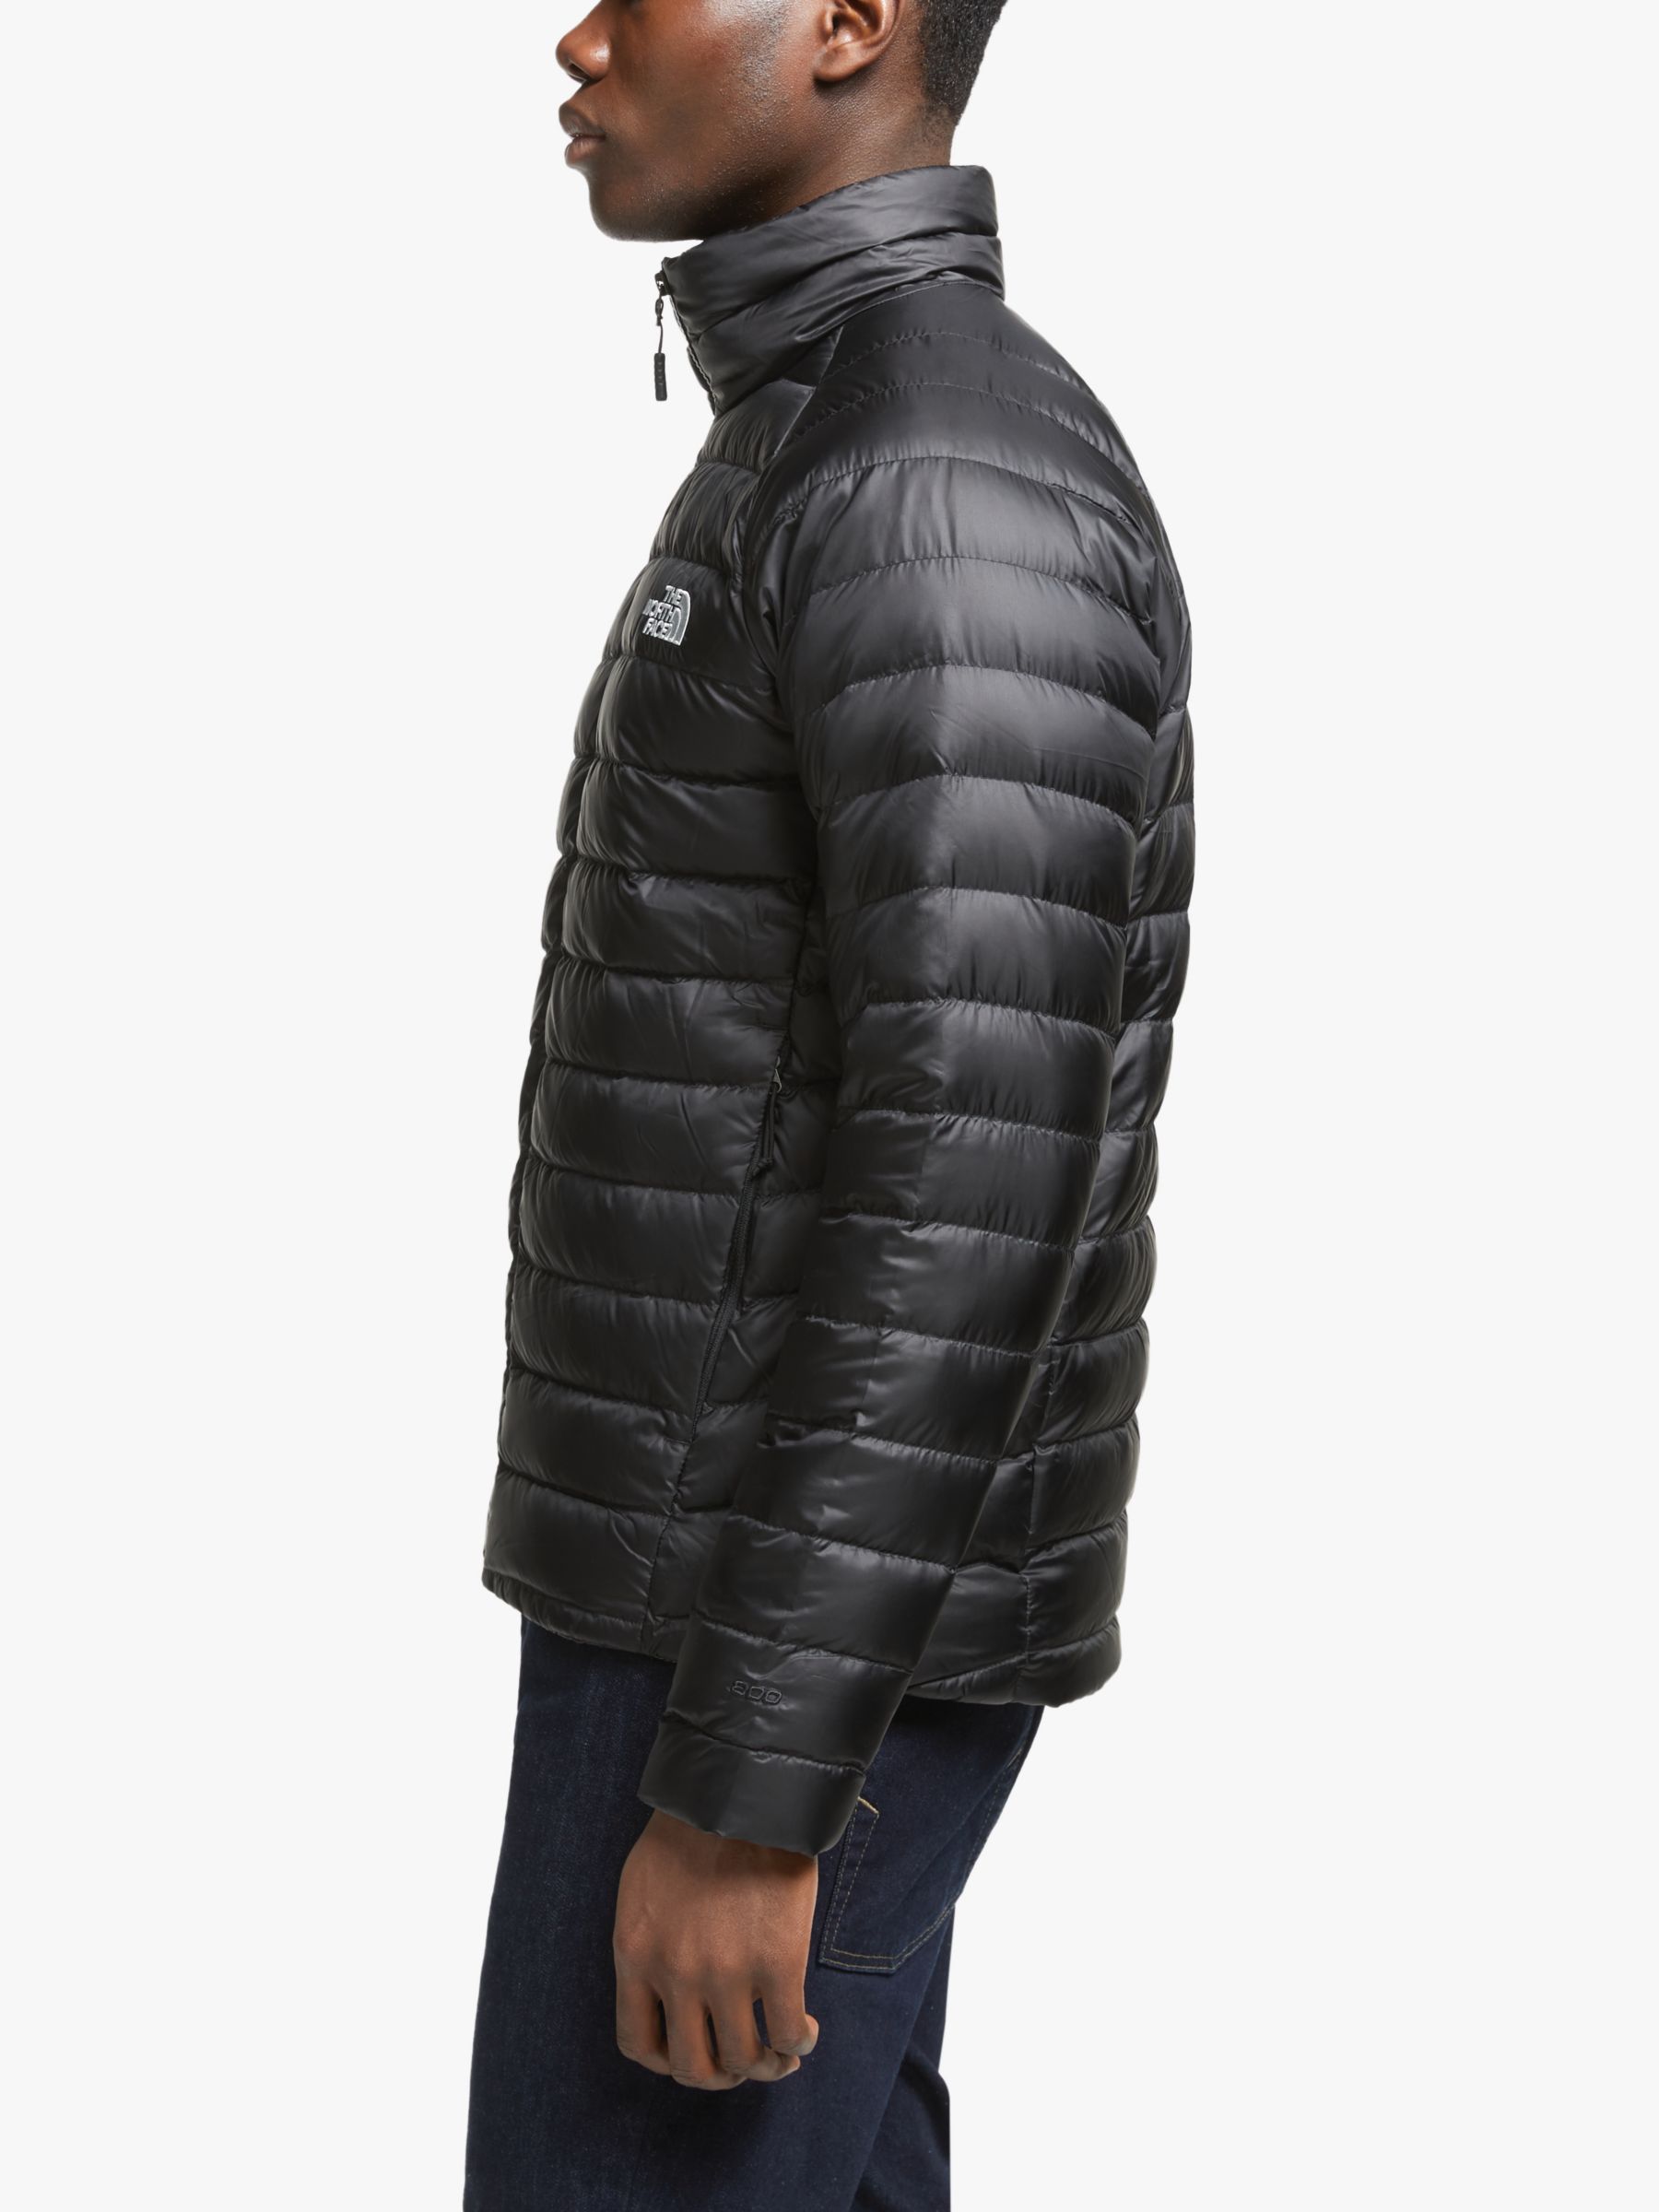 The North Face Men S Waterproof Trevail Jacket Black At John Lewis Partners